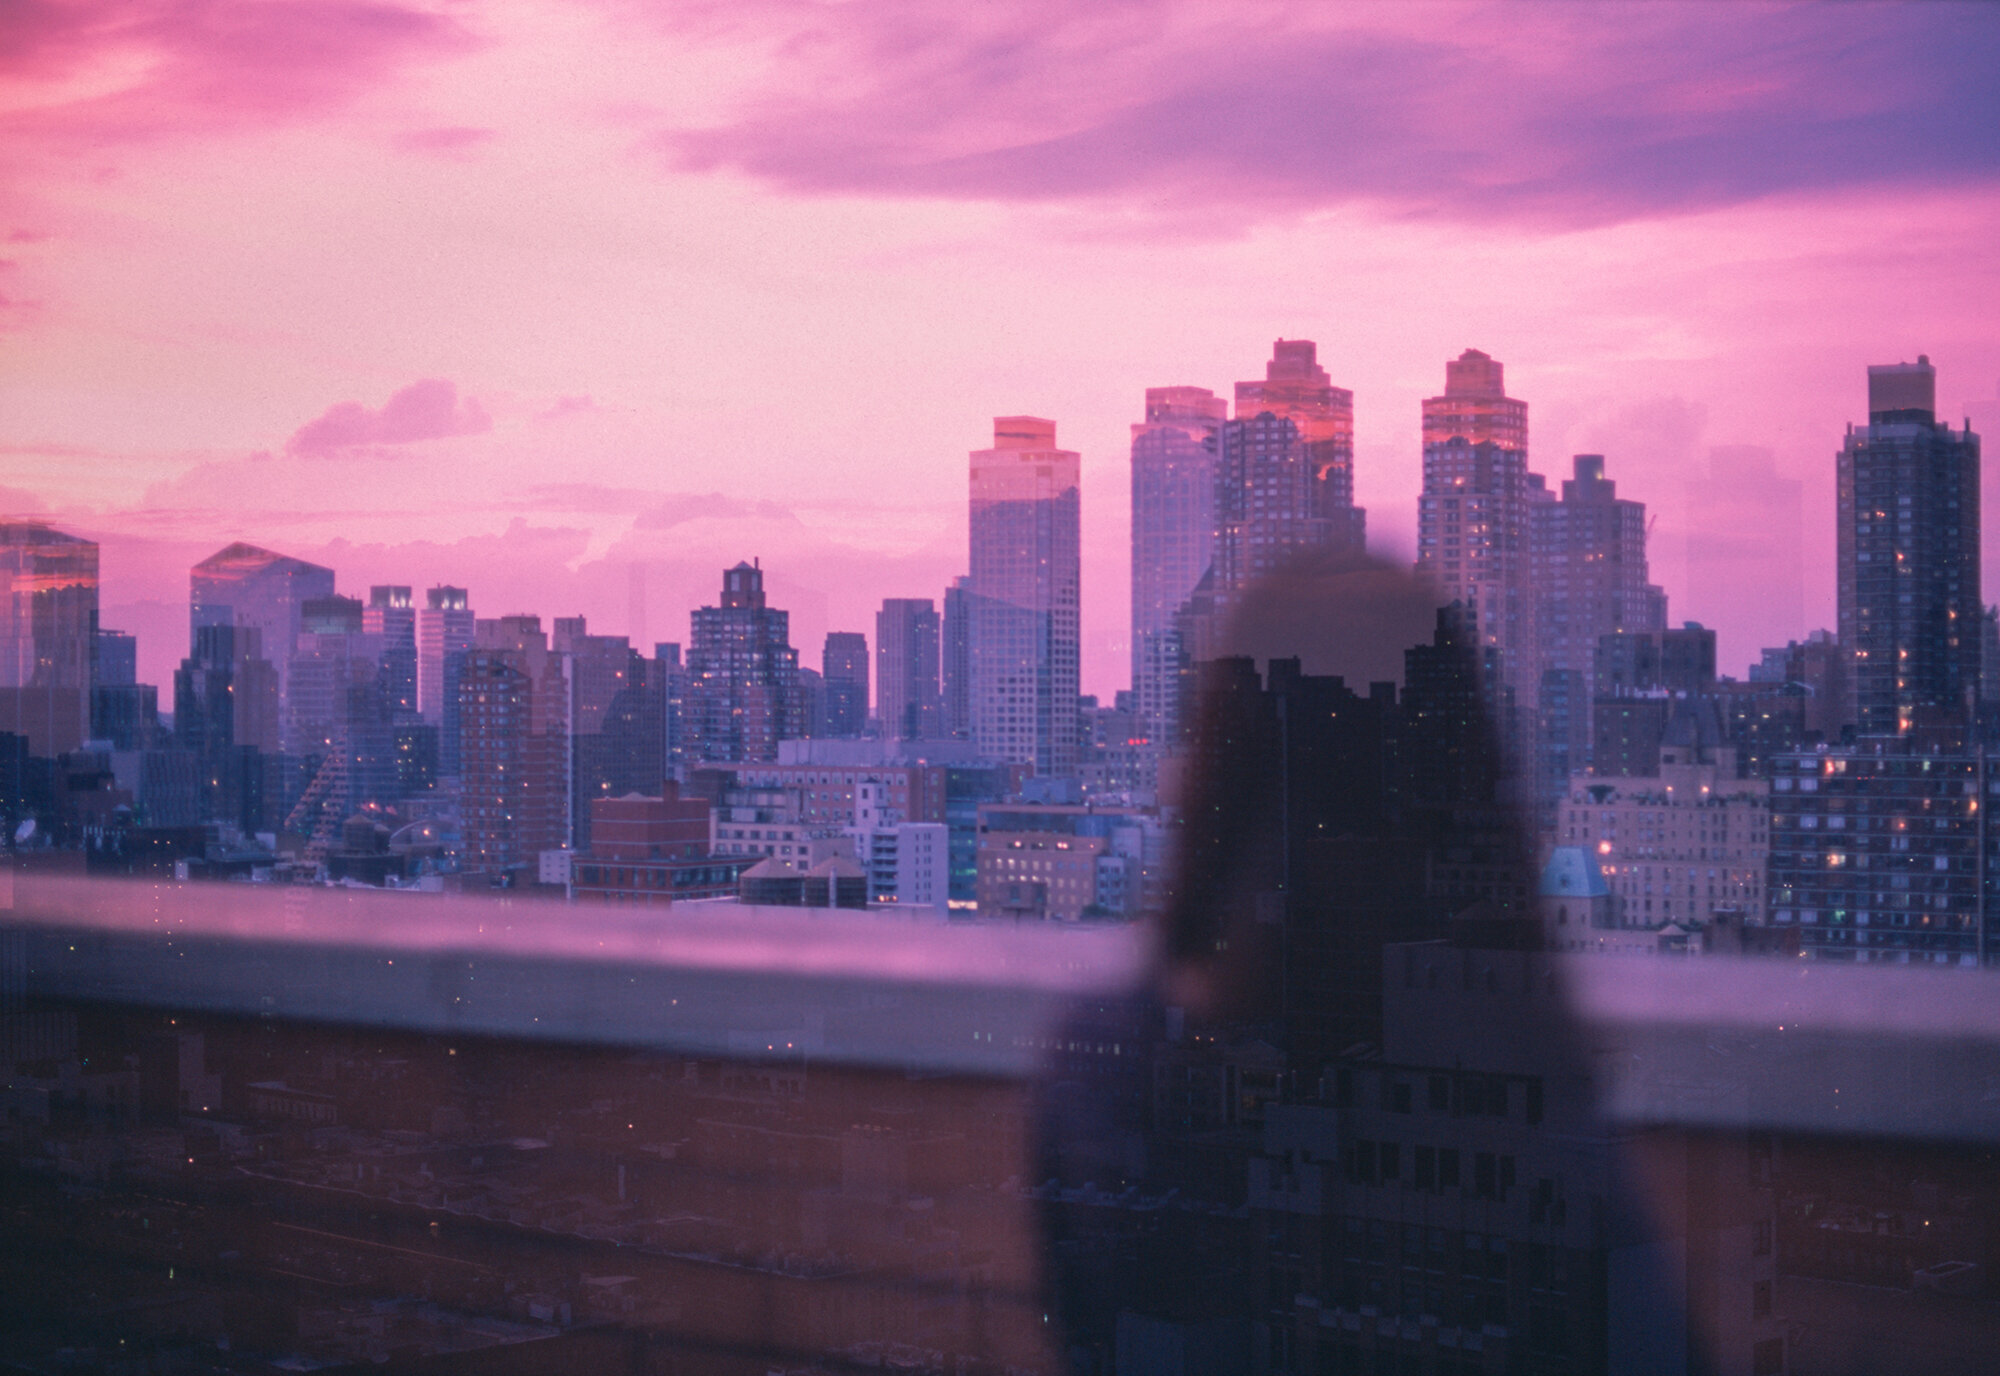  A Place to Watch the Sunset // Manhattan, New York City 